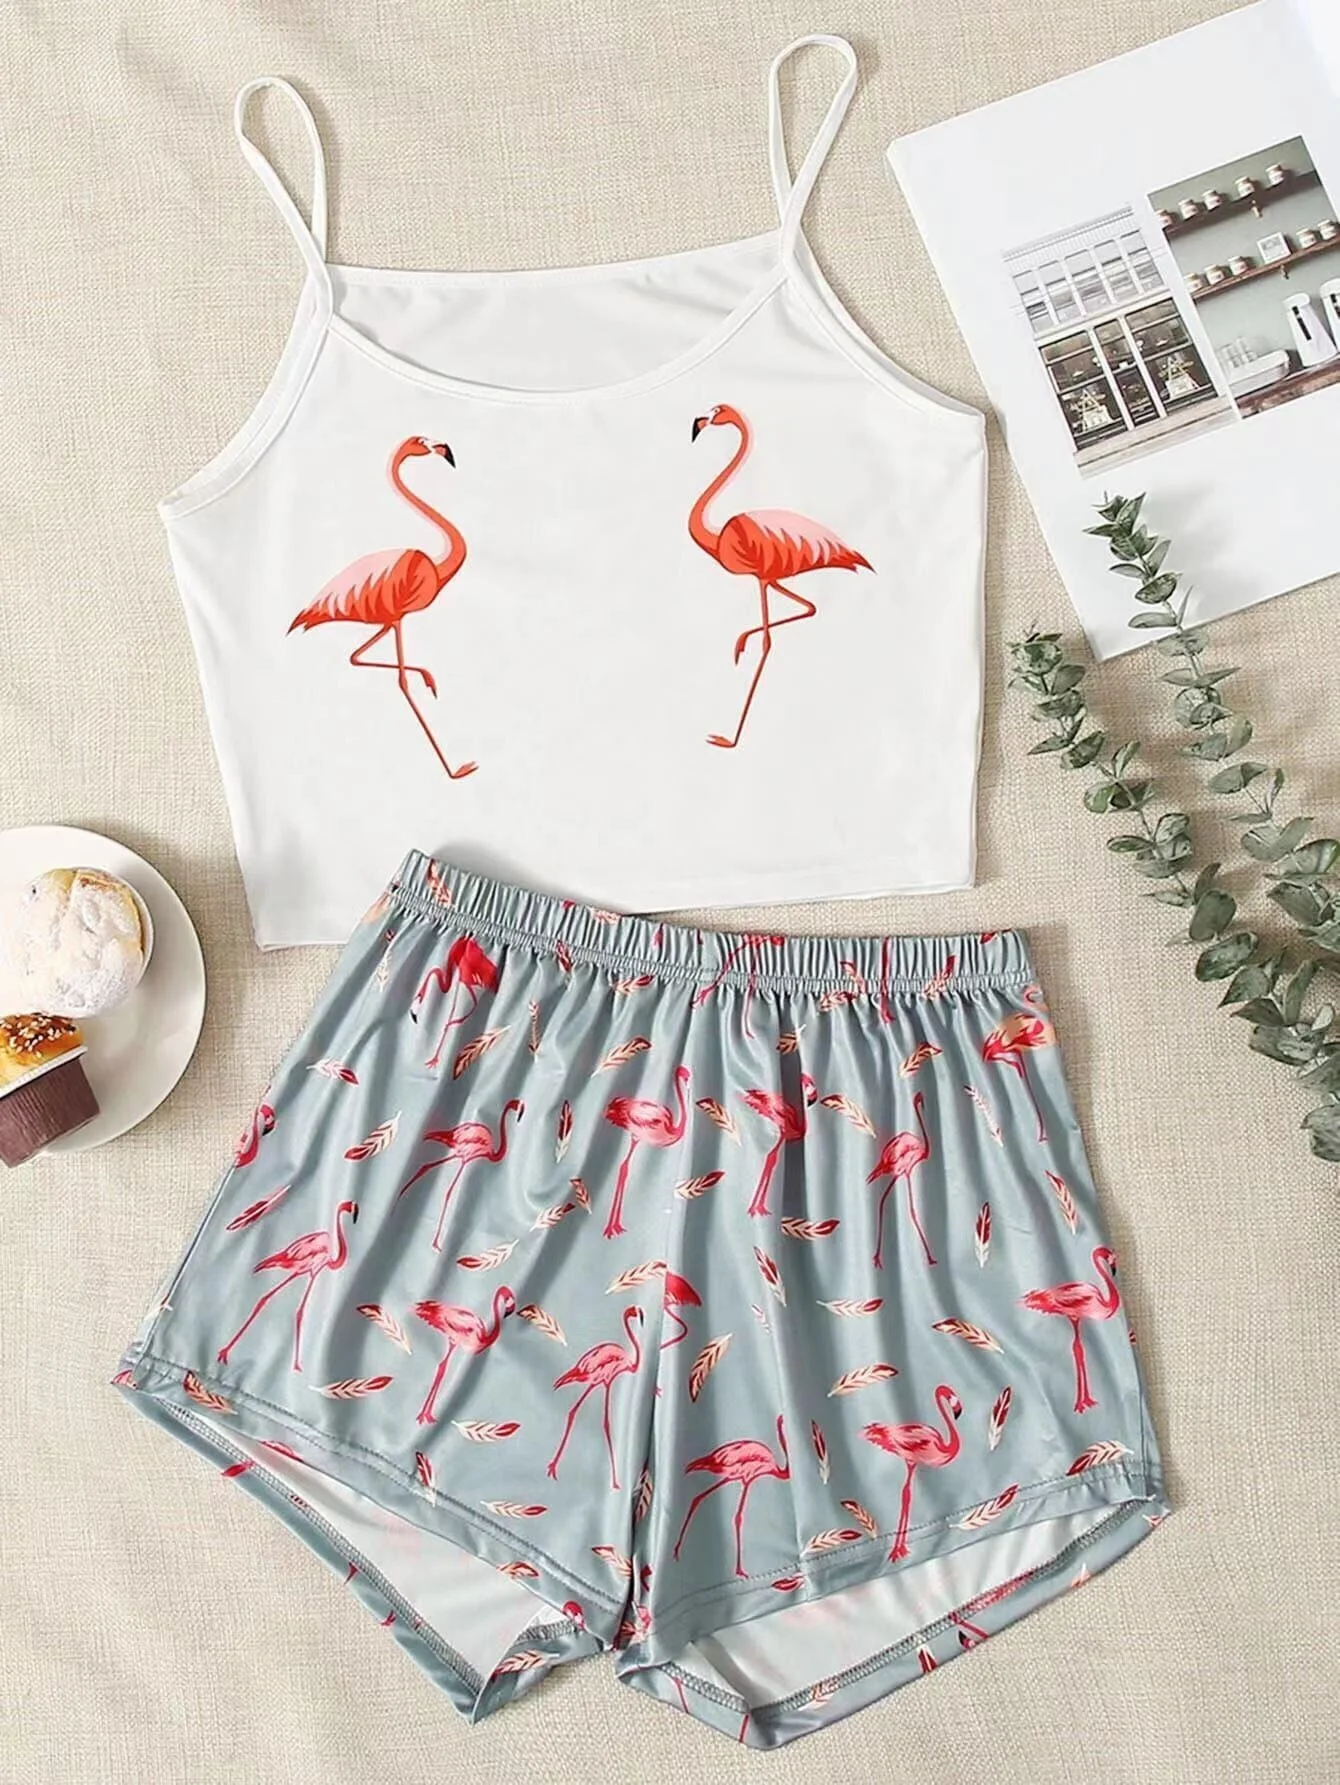 

New Style Lady’s Summer Flamingo Print Camisole With Shorts Pajama Set Cute Comfortable Home Wear Sleepwear Underwear